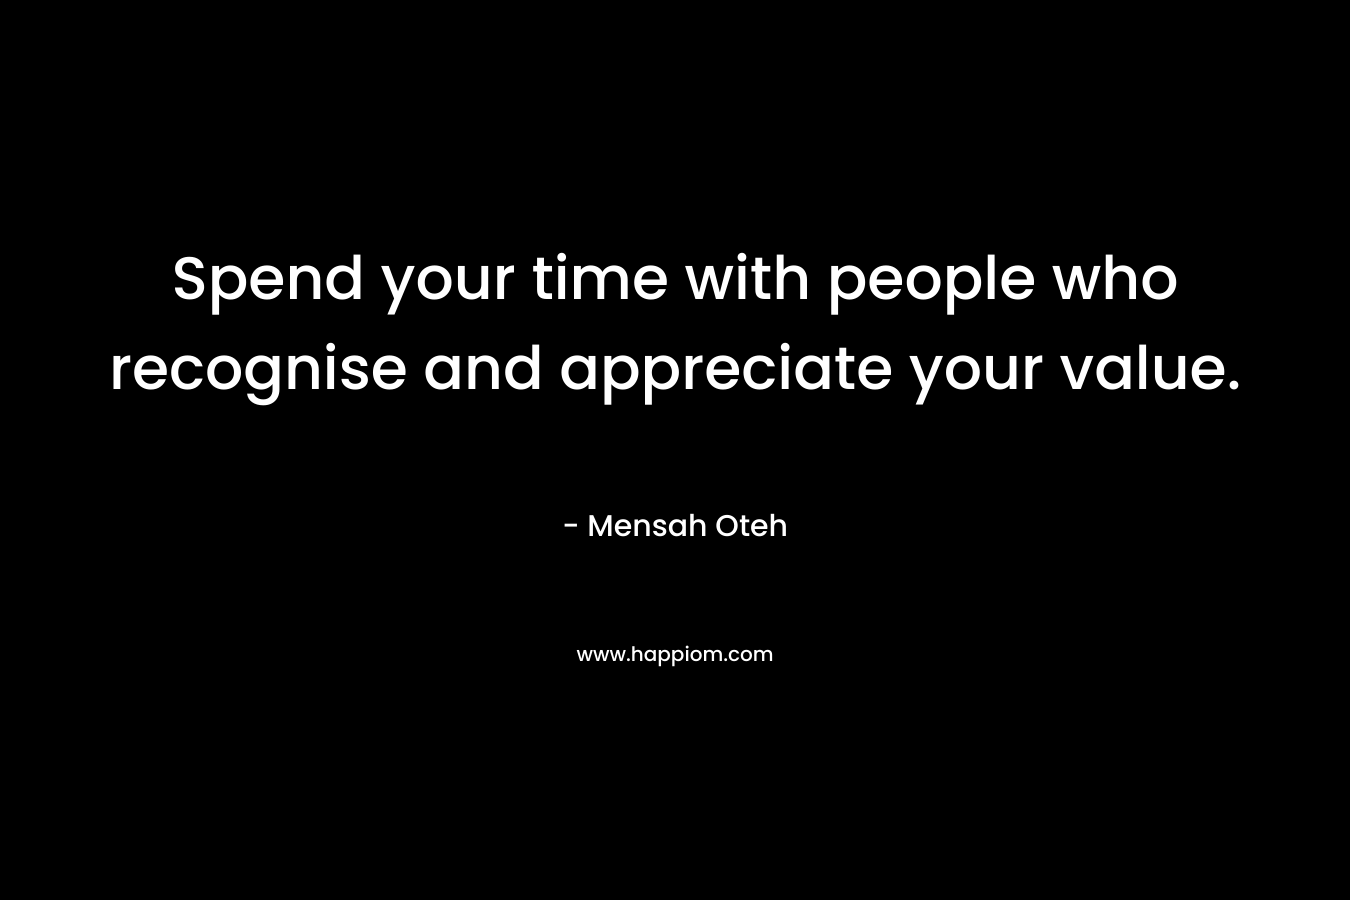 Spend your time with people who recognise and appreciate your value. – Mensah Oteh